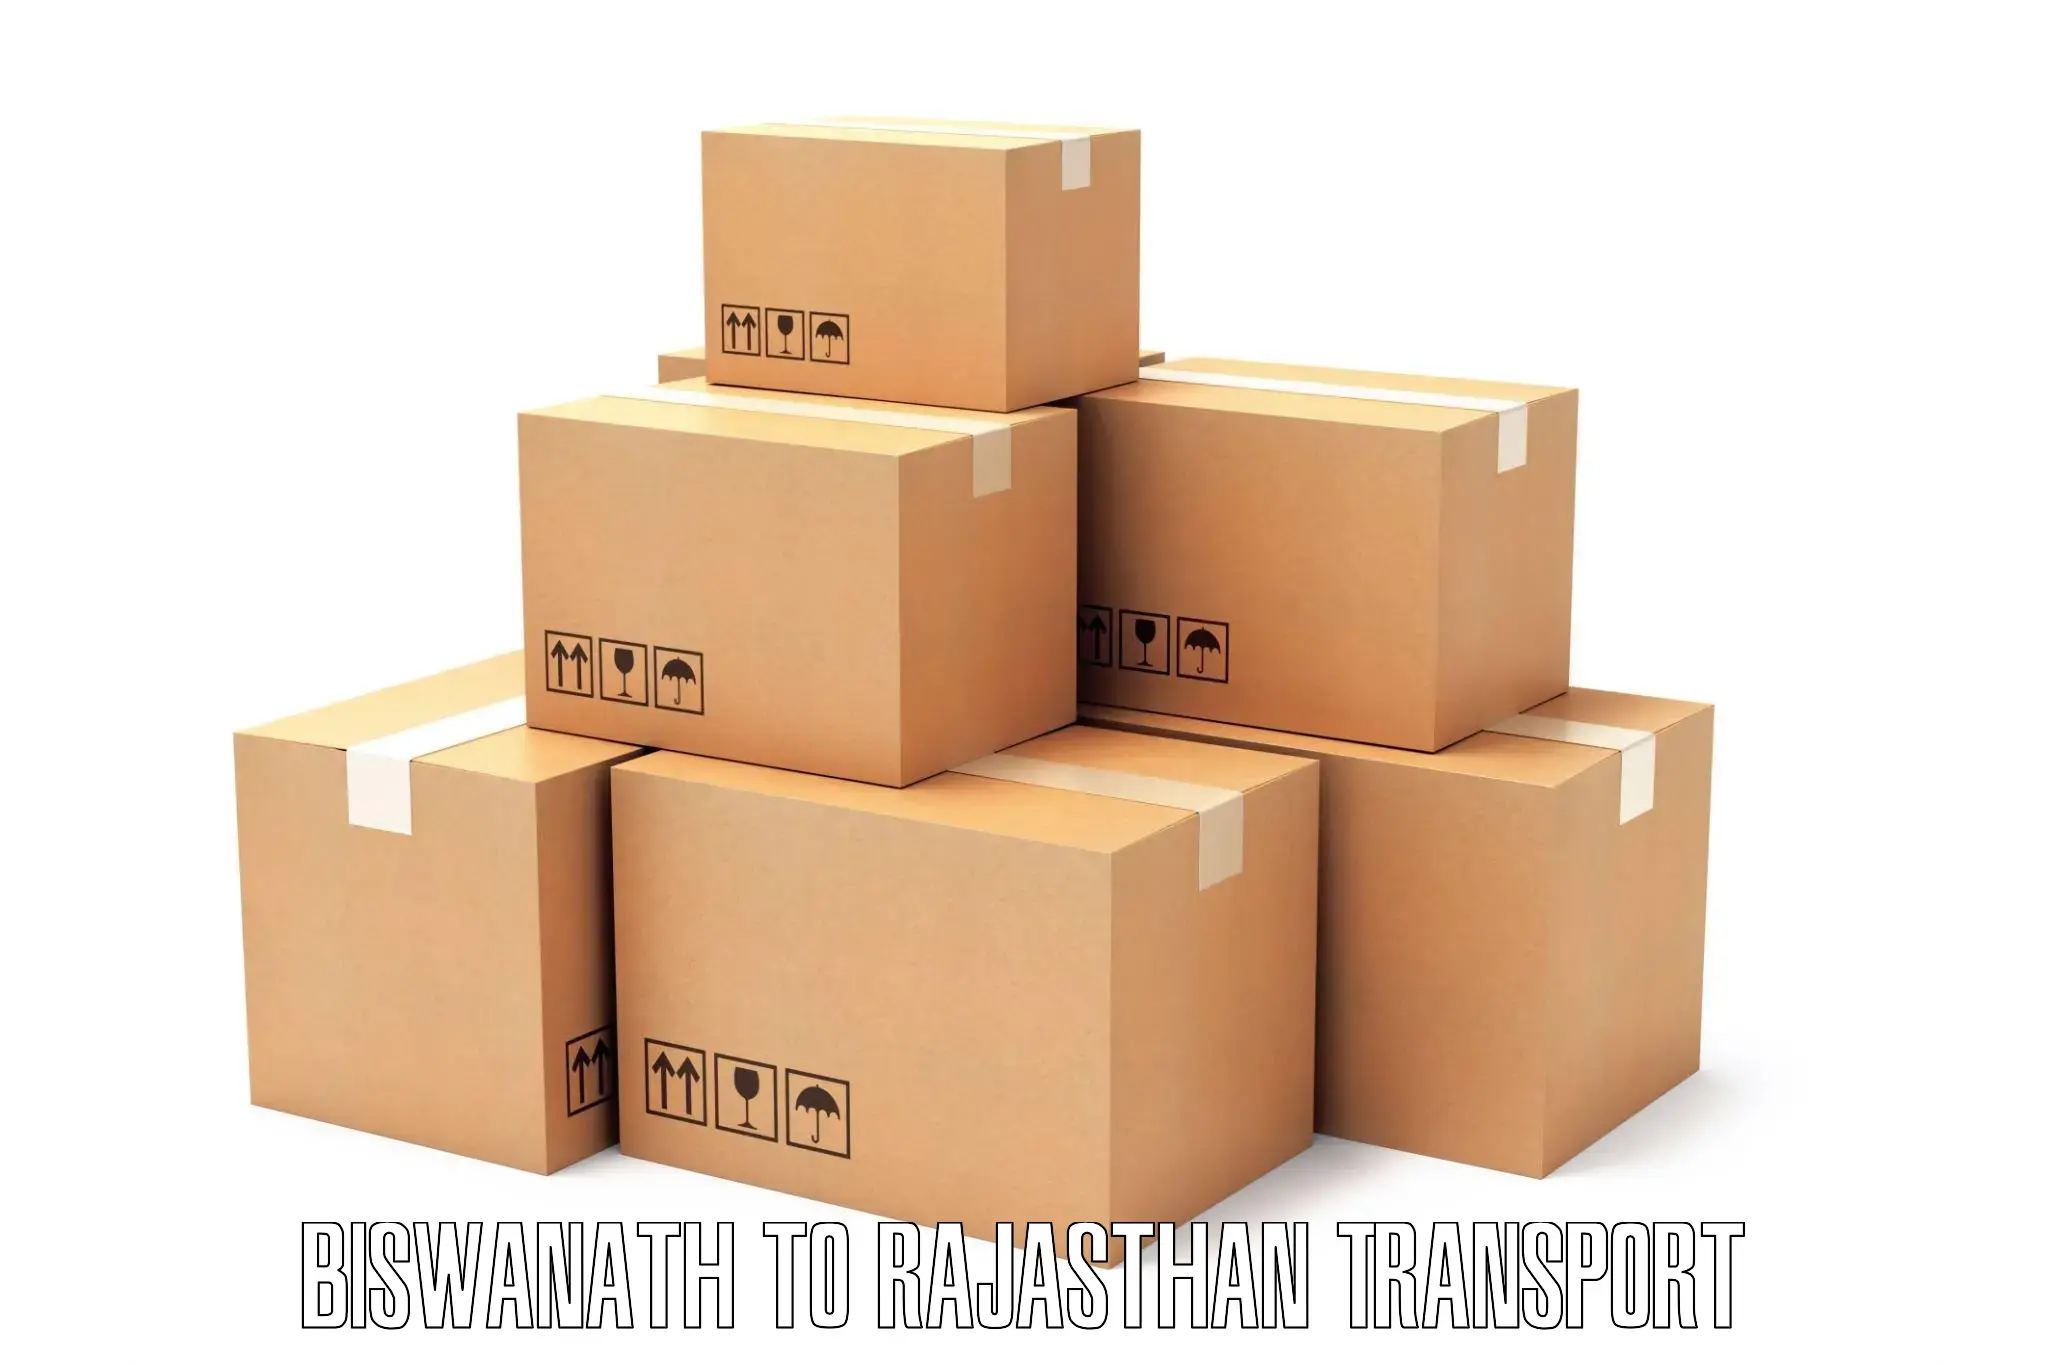 Commercial transport service Biswanath to Rajasthan